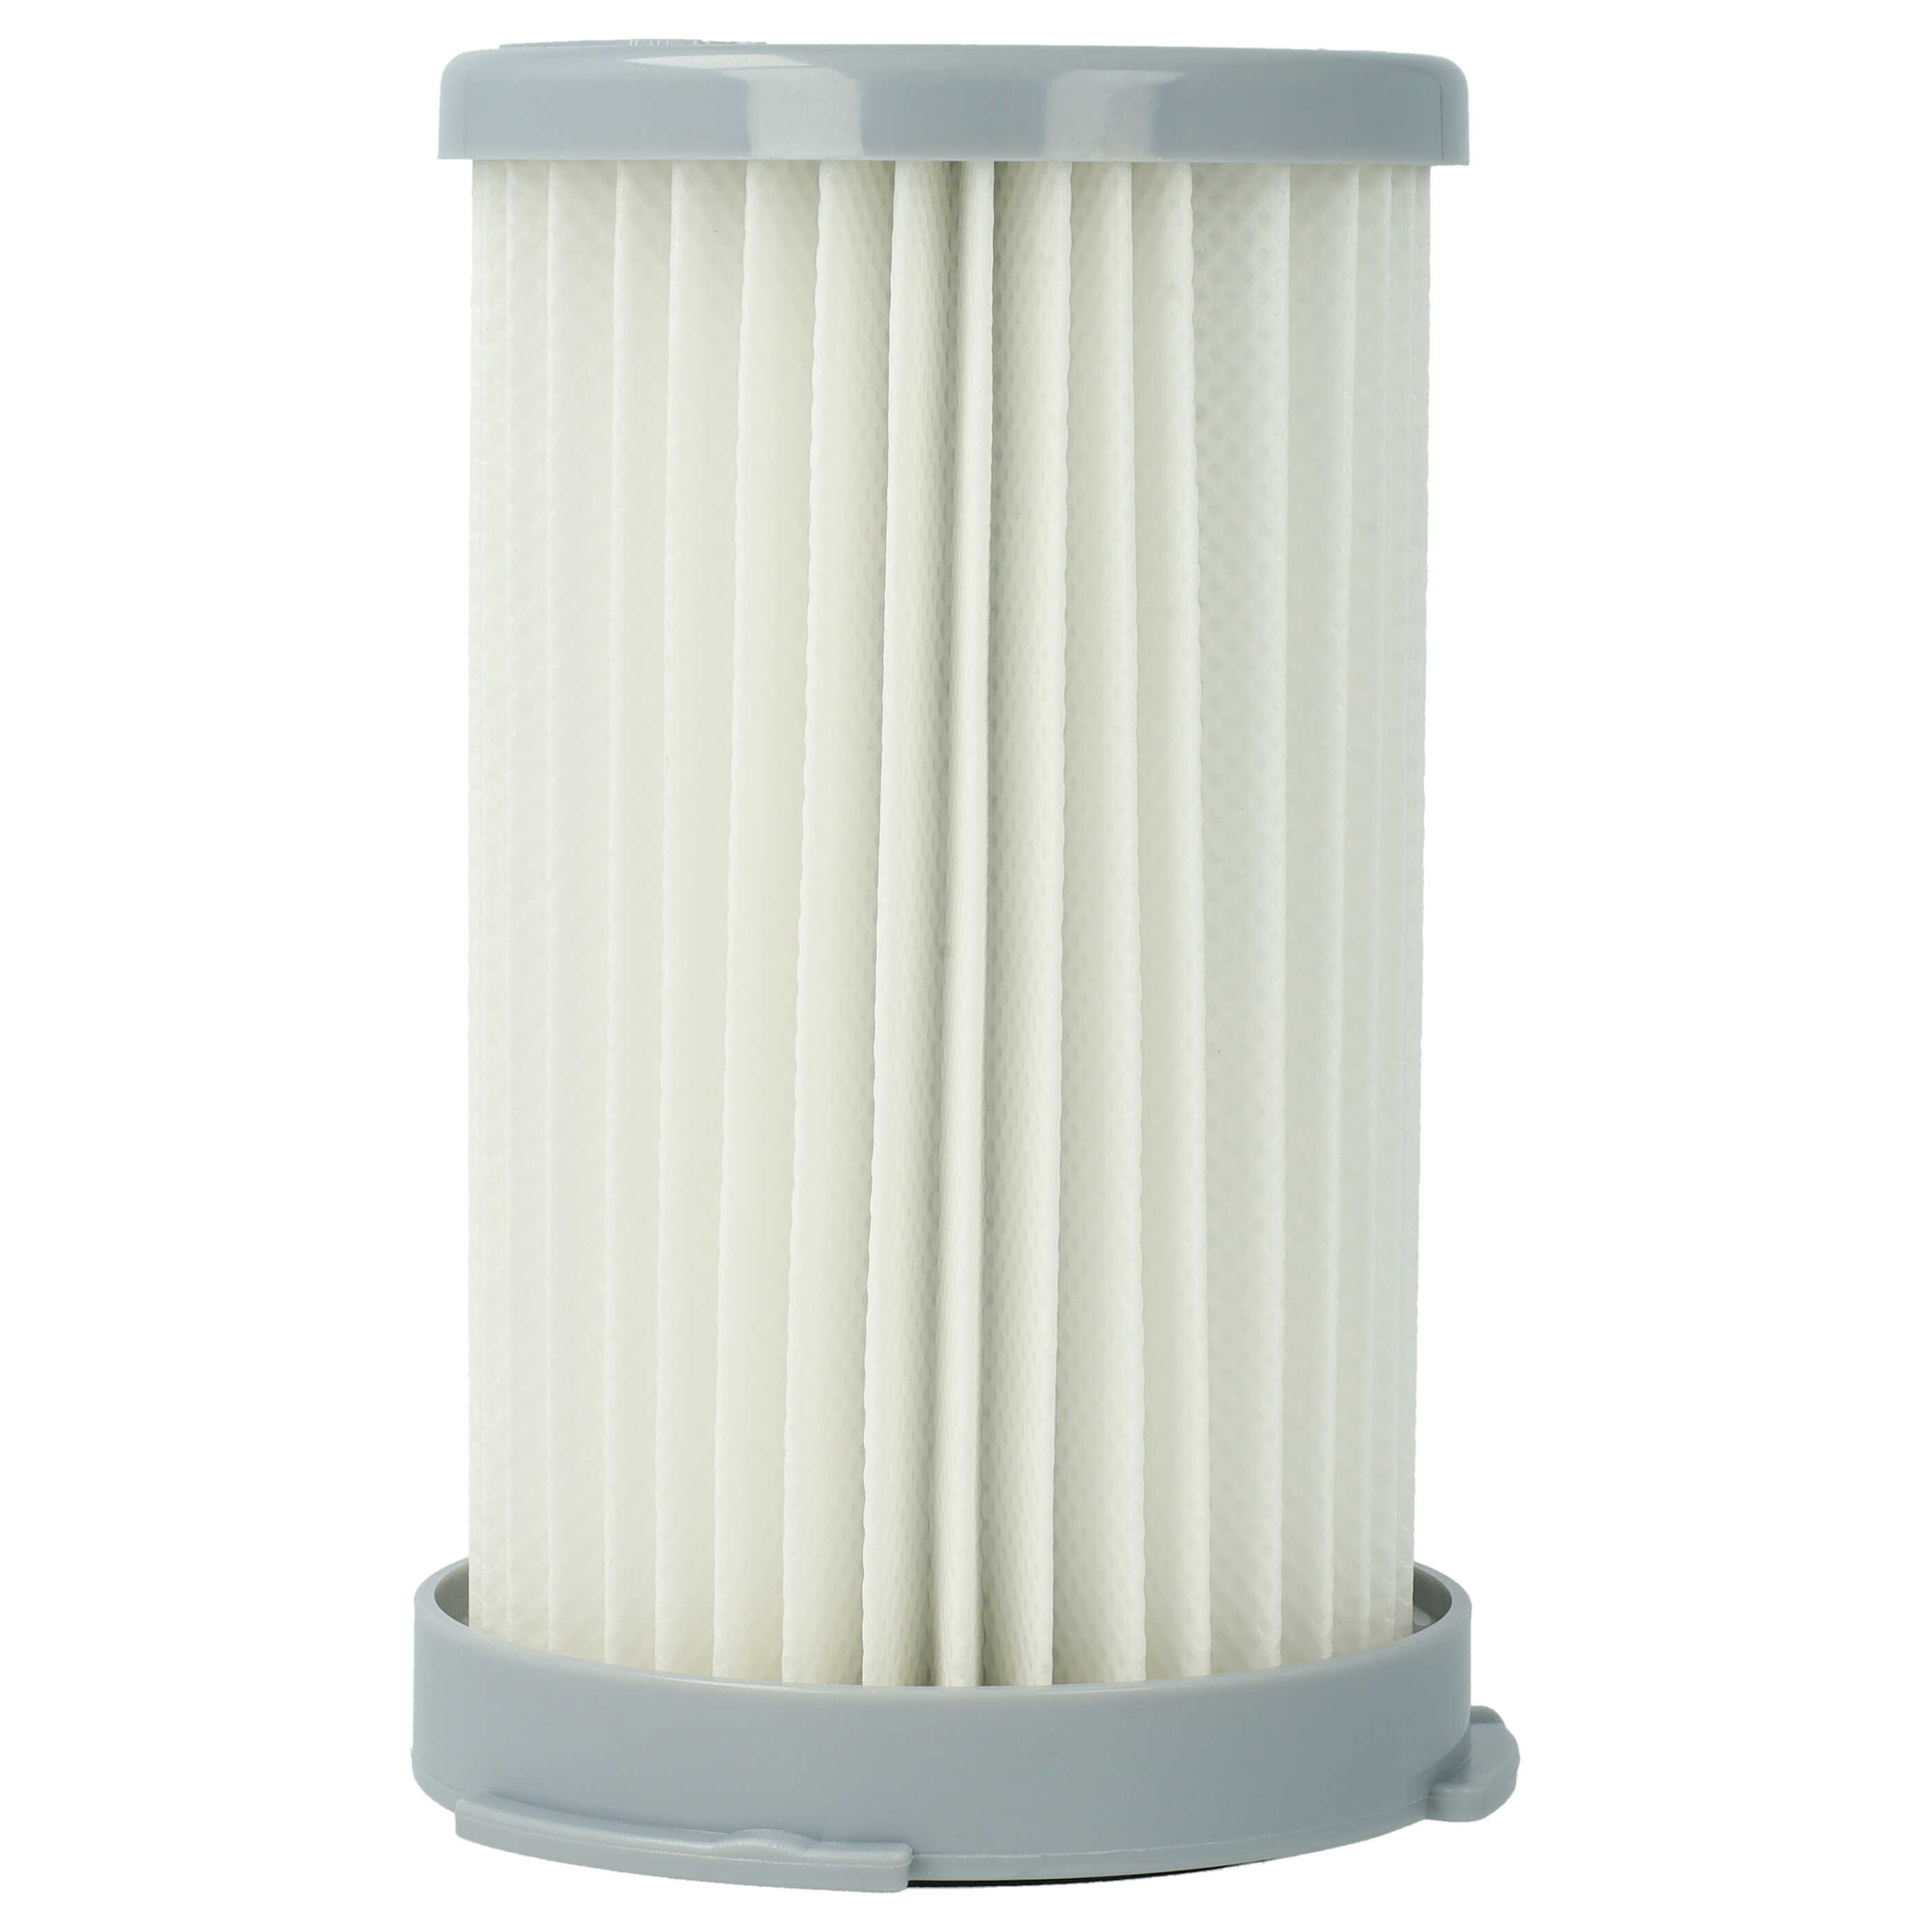 1x HEPA filter replaces Electrolux 9001966051 for Electrolux Vacuum Cleaner, filter class F5